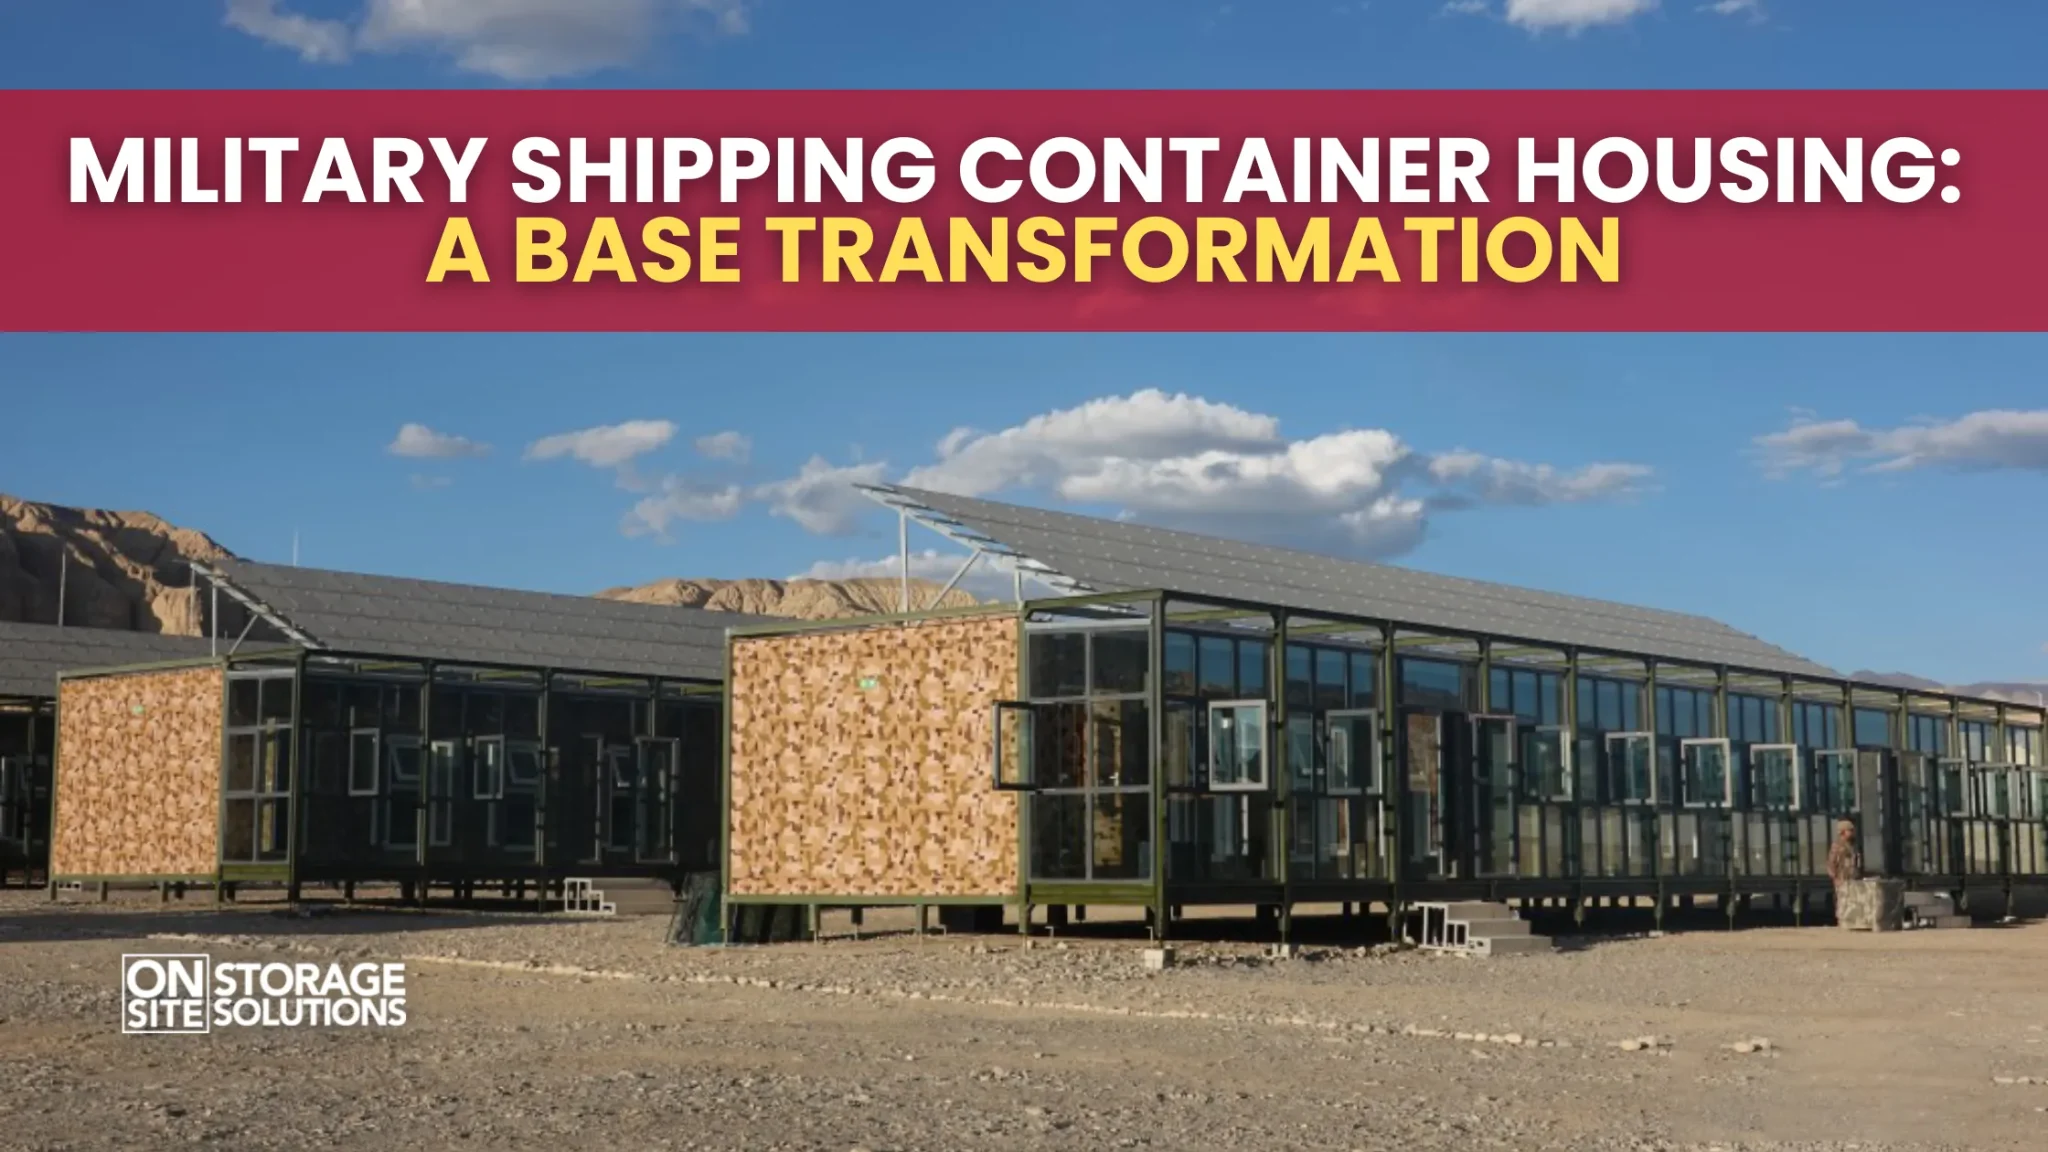 Military Shipping Container Housing: A Base Transformation